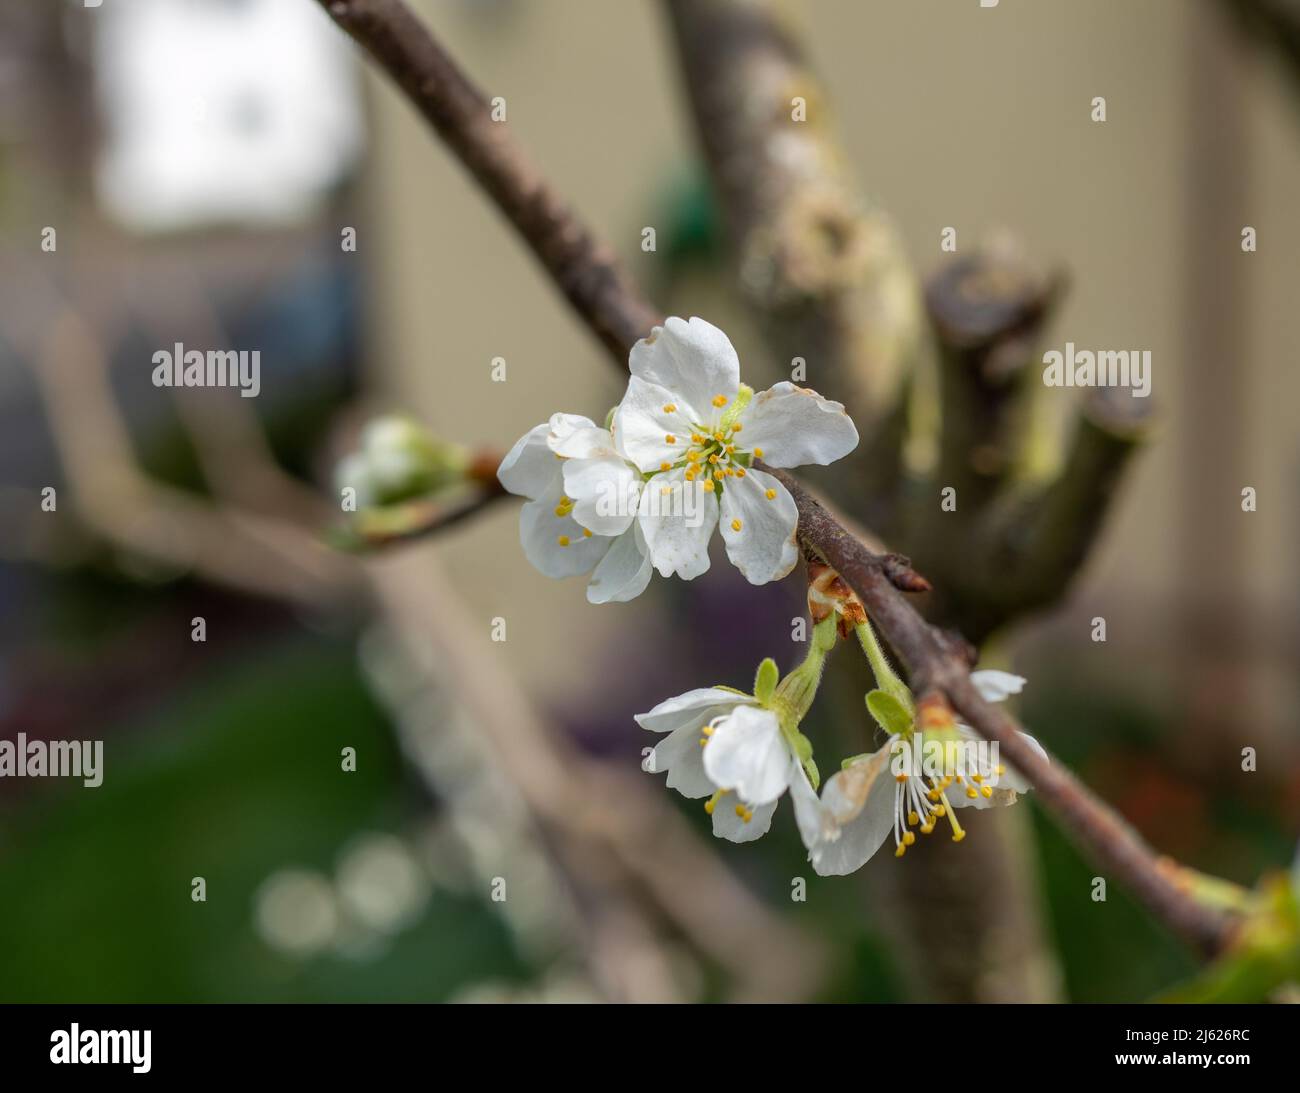 Blossom of a plum tree in spring Stock Photo